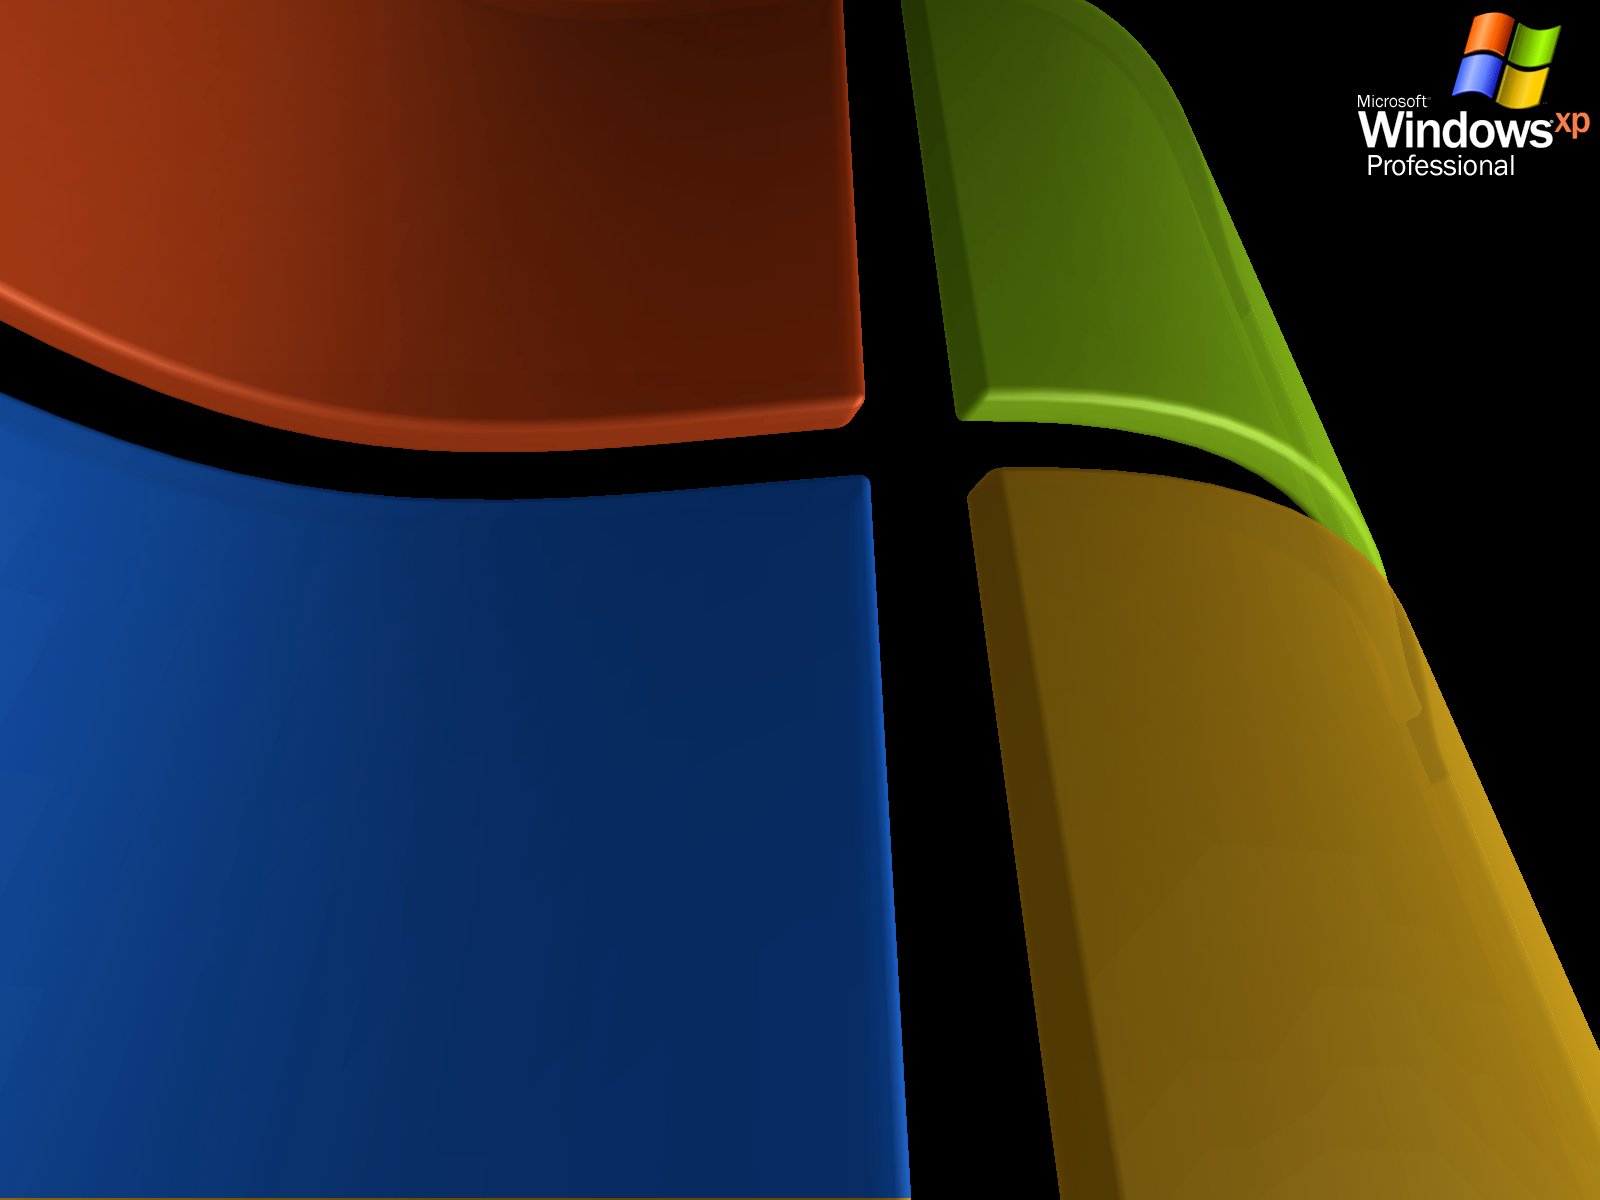 Free download Windows Xp Professional Wallpaper [1600x1200] for your